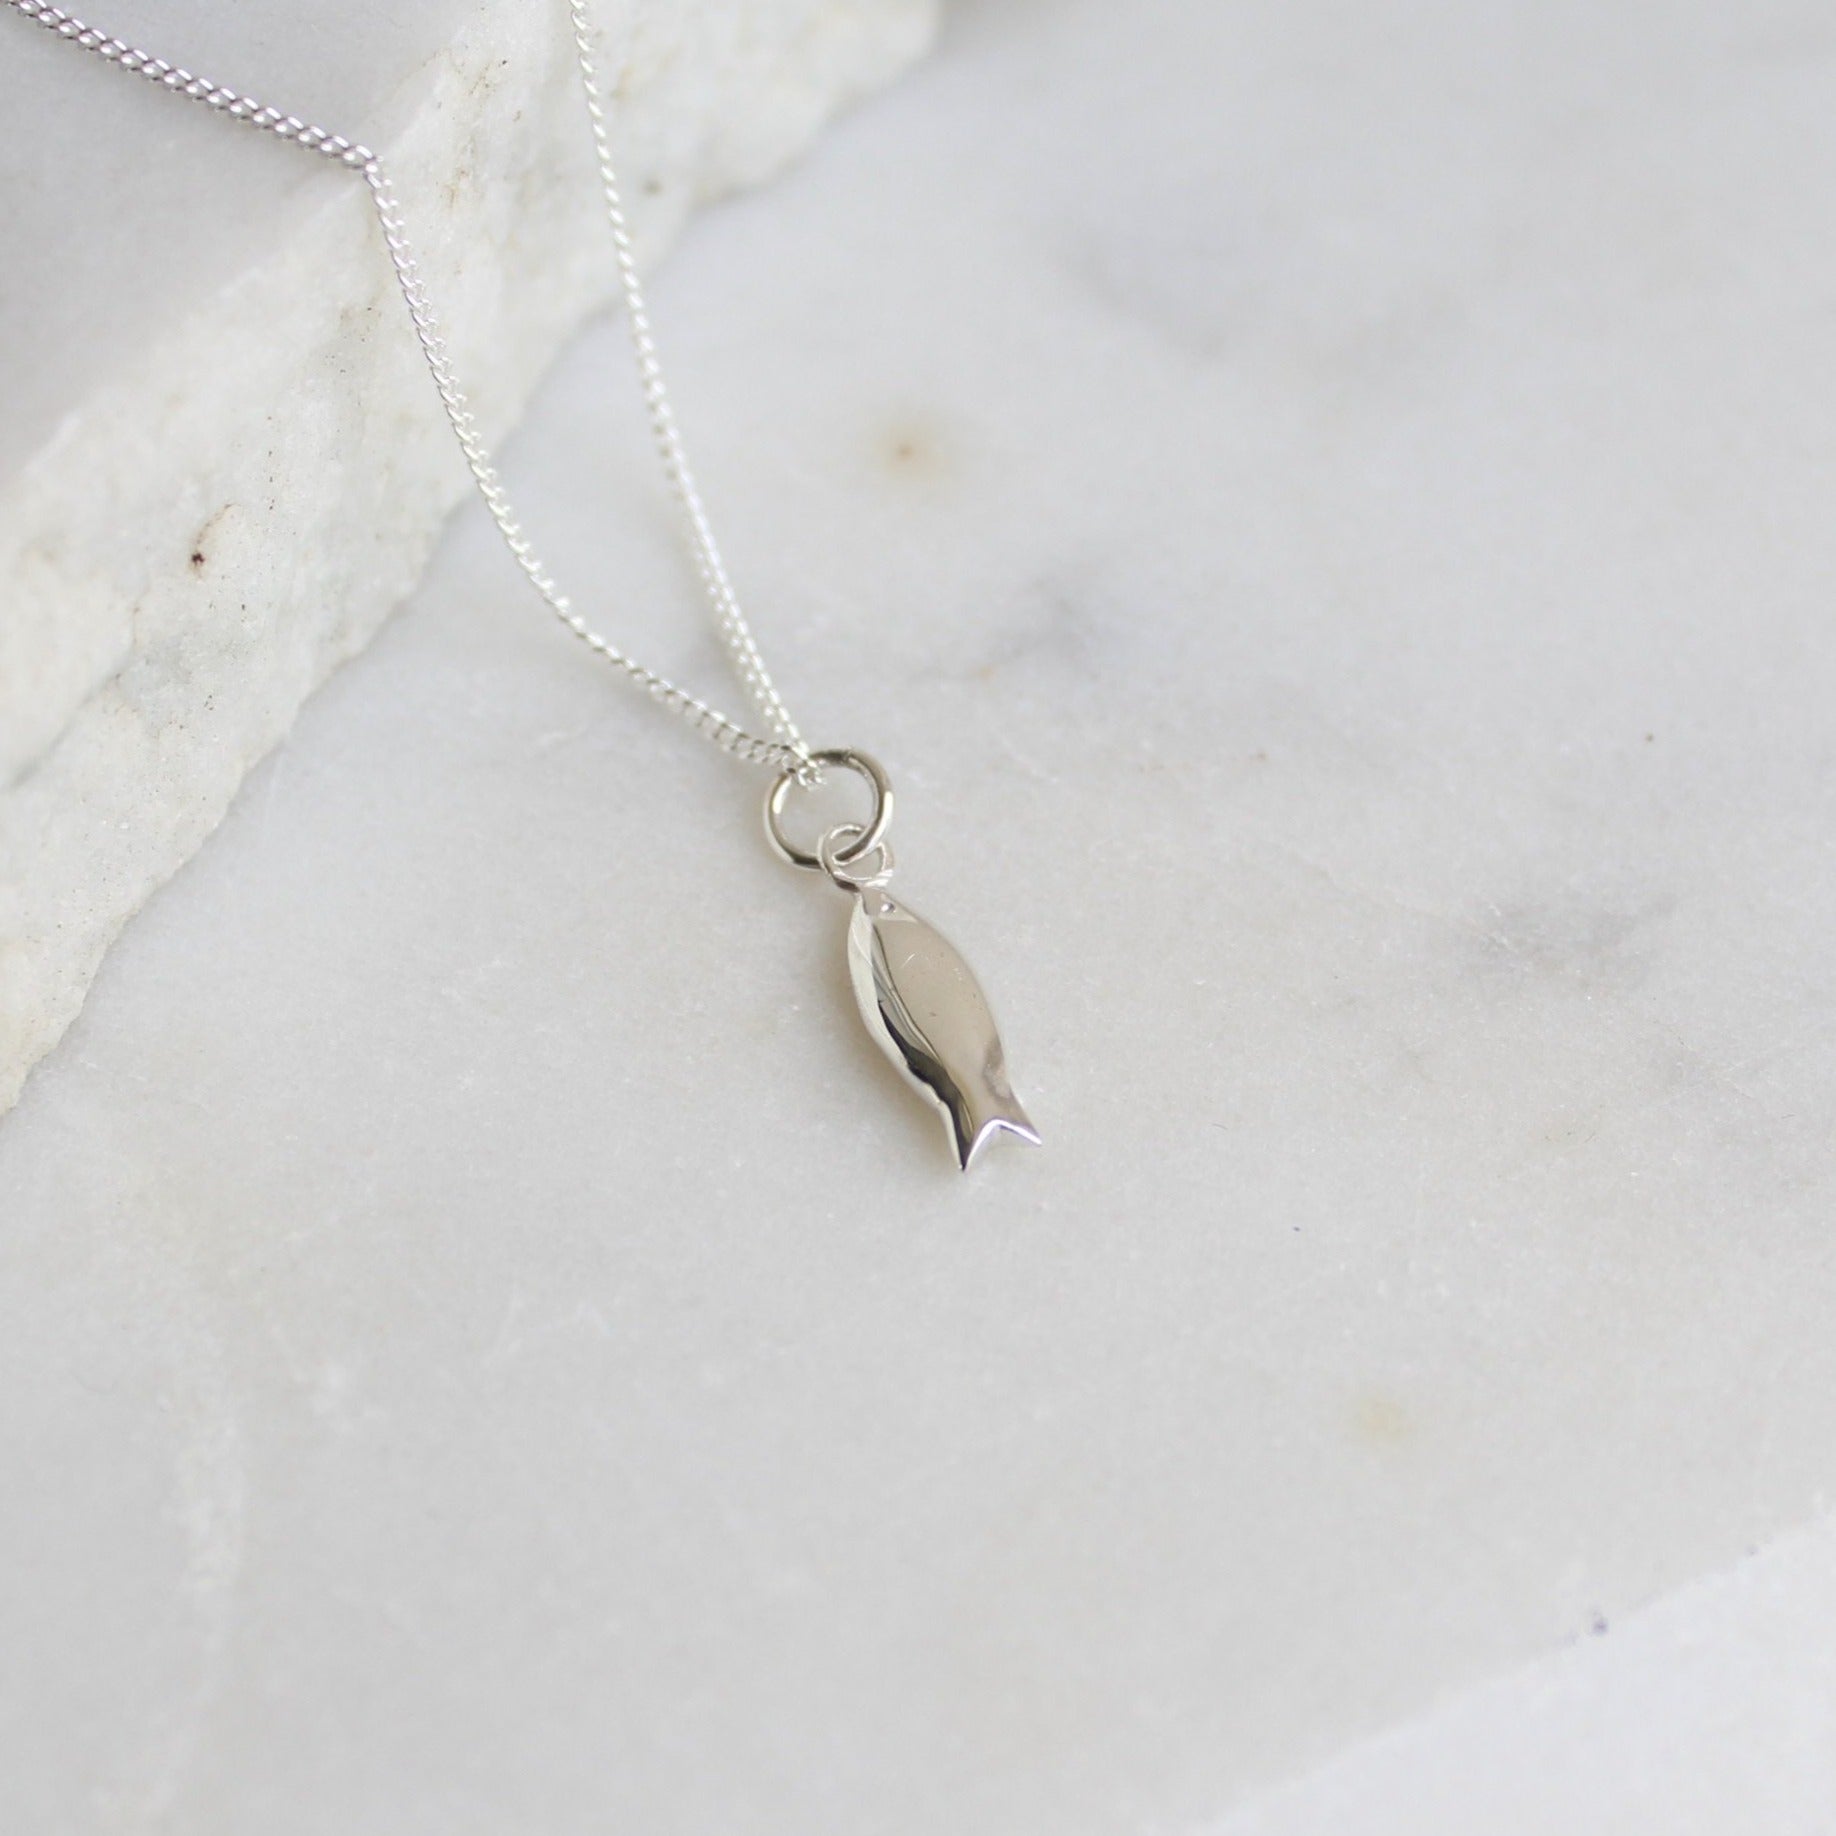 Tiny Fish Charm Necklace Sterling Silver